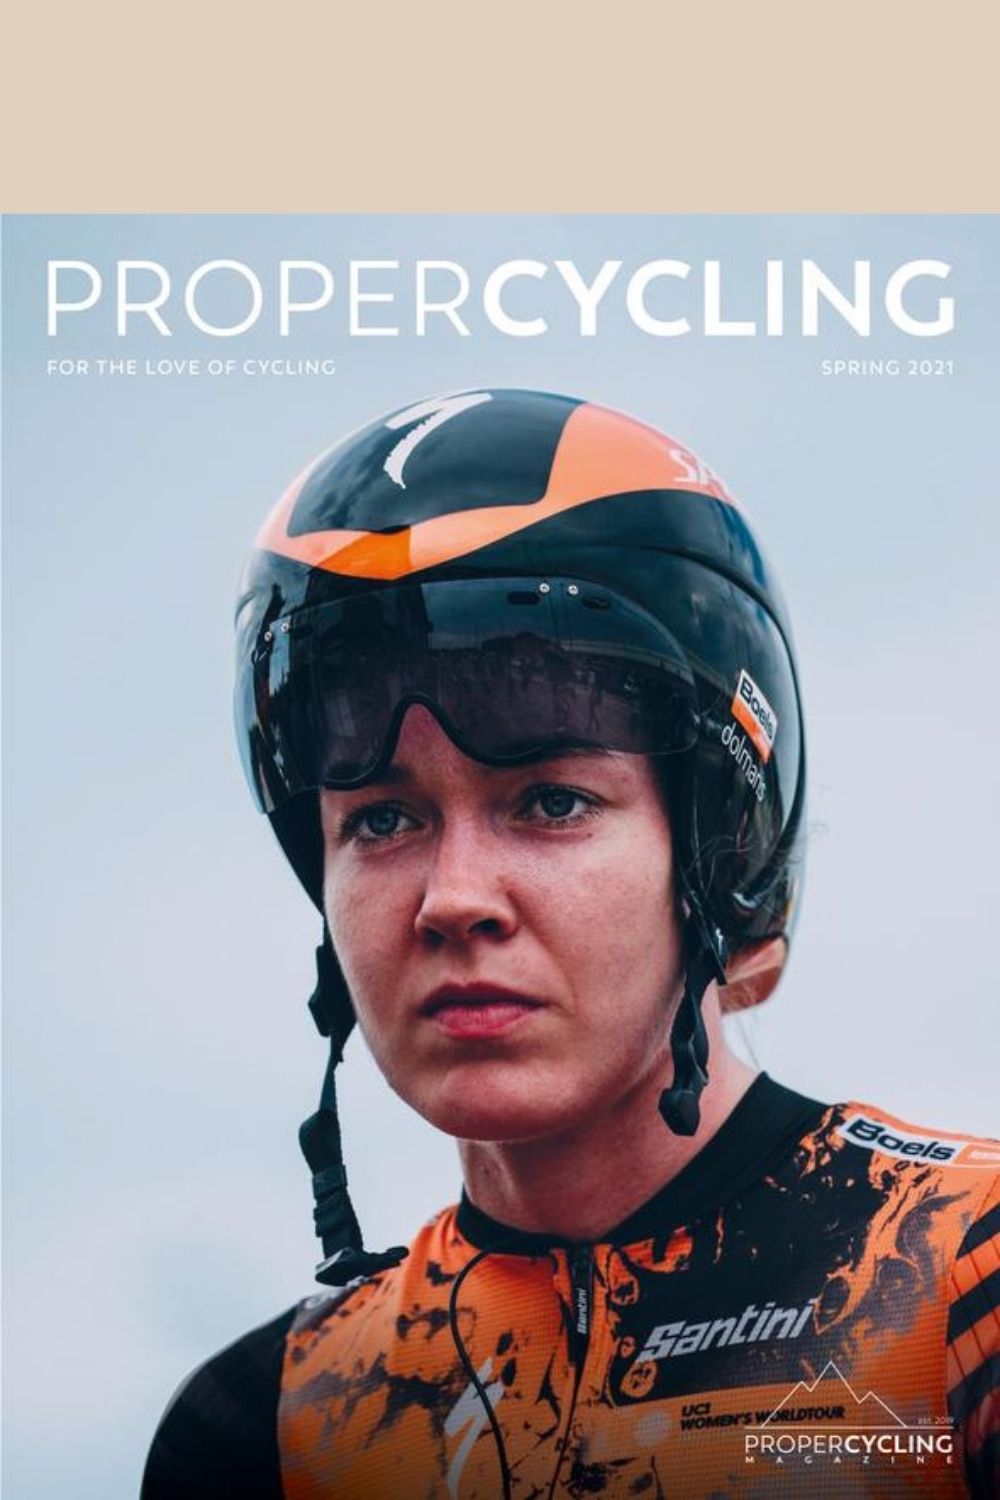 Front cover of Proper Cycling magazine Issue 2